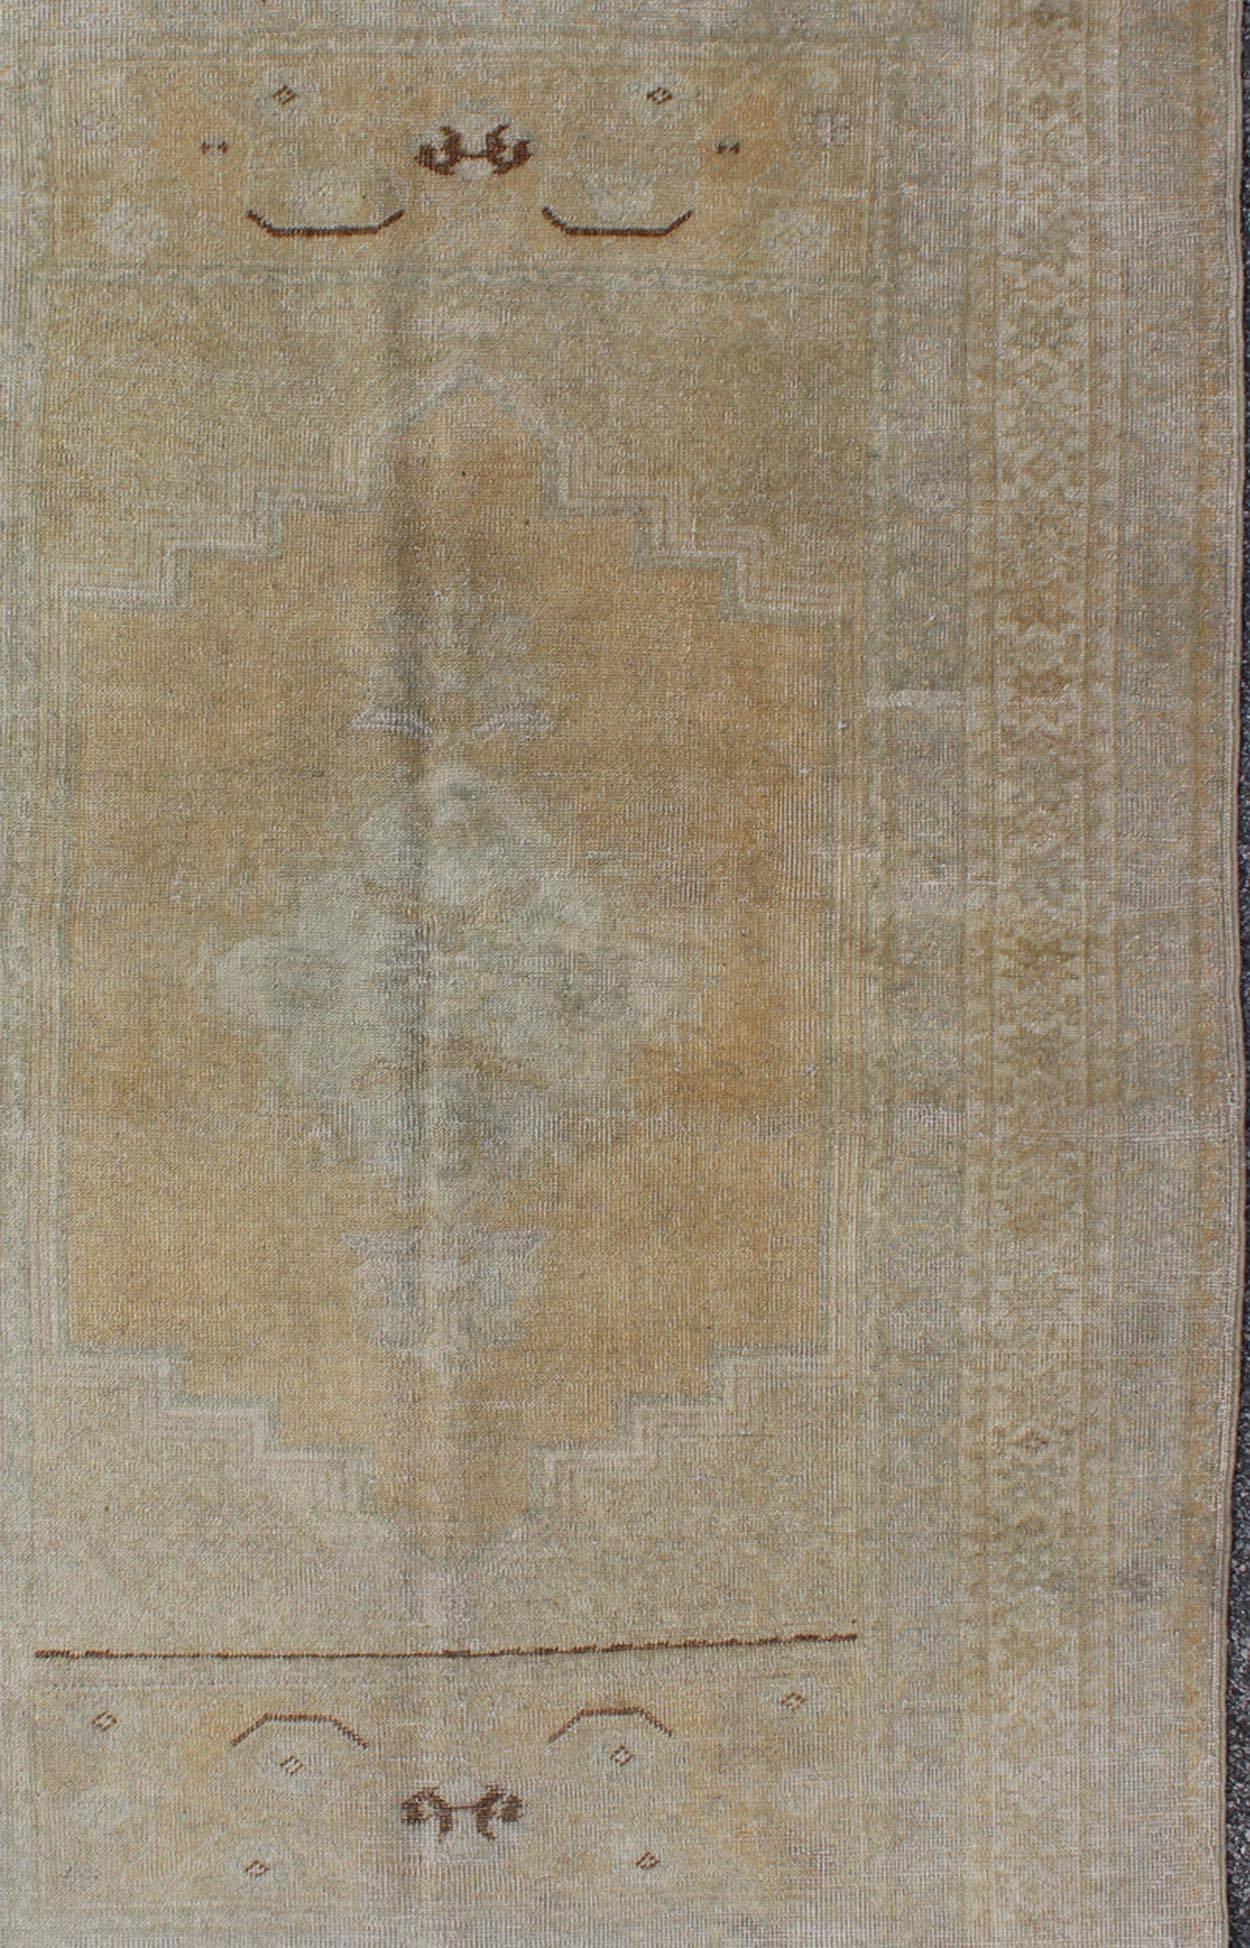 Faded Turkish Oushak Carpet with Geometric Floral Motifs in Tan, Yellow & Gray In Good Condition For Sale In Atlanta, GA